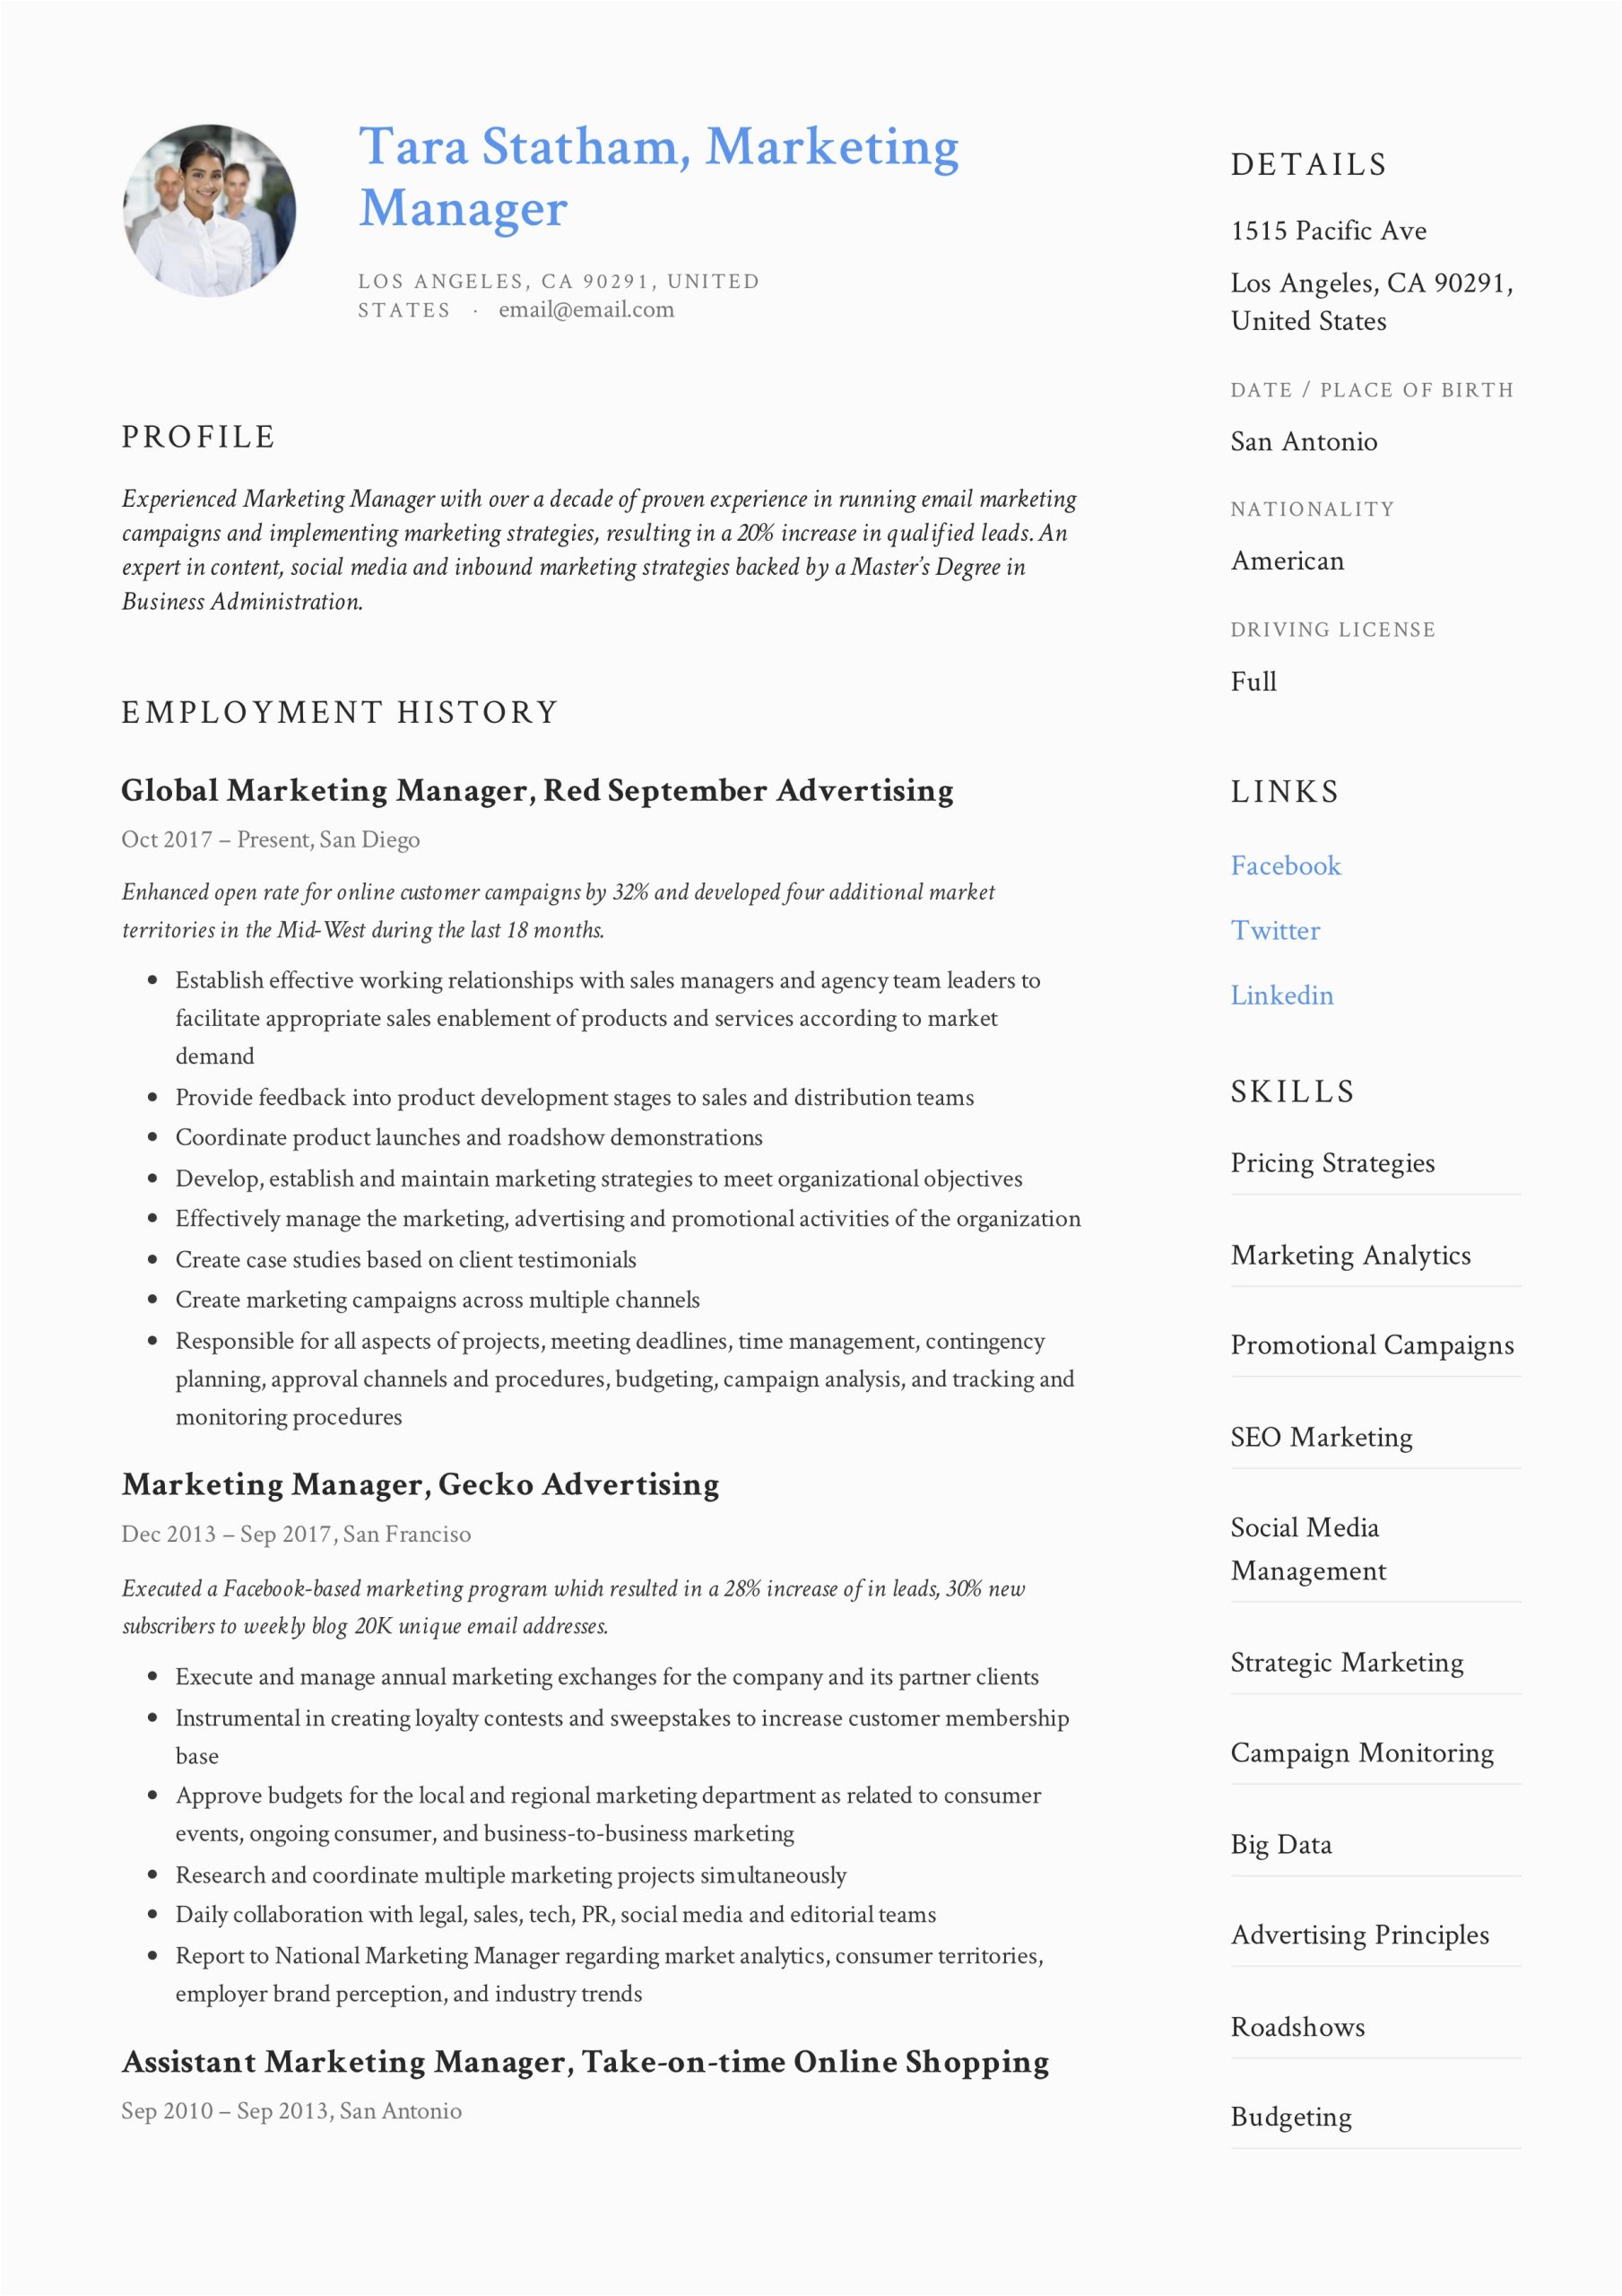 Sample Resume format for Marketing Professional Marketing Manager Resume Writing Guide 12 Templates